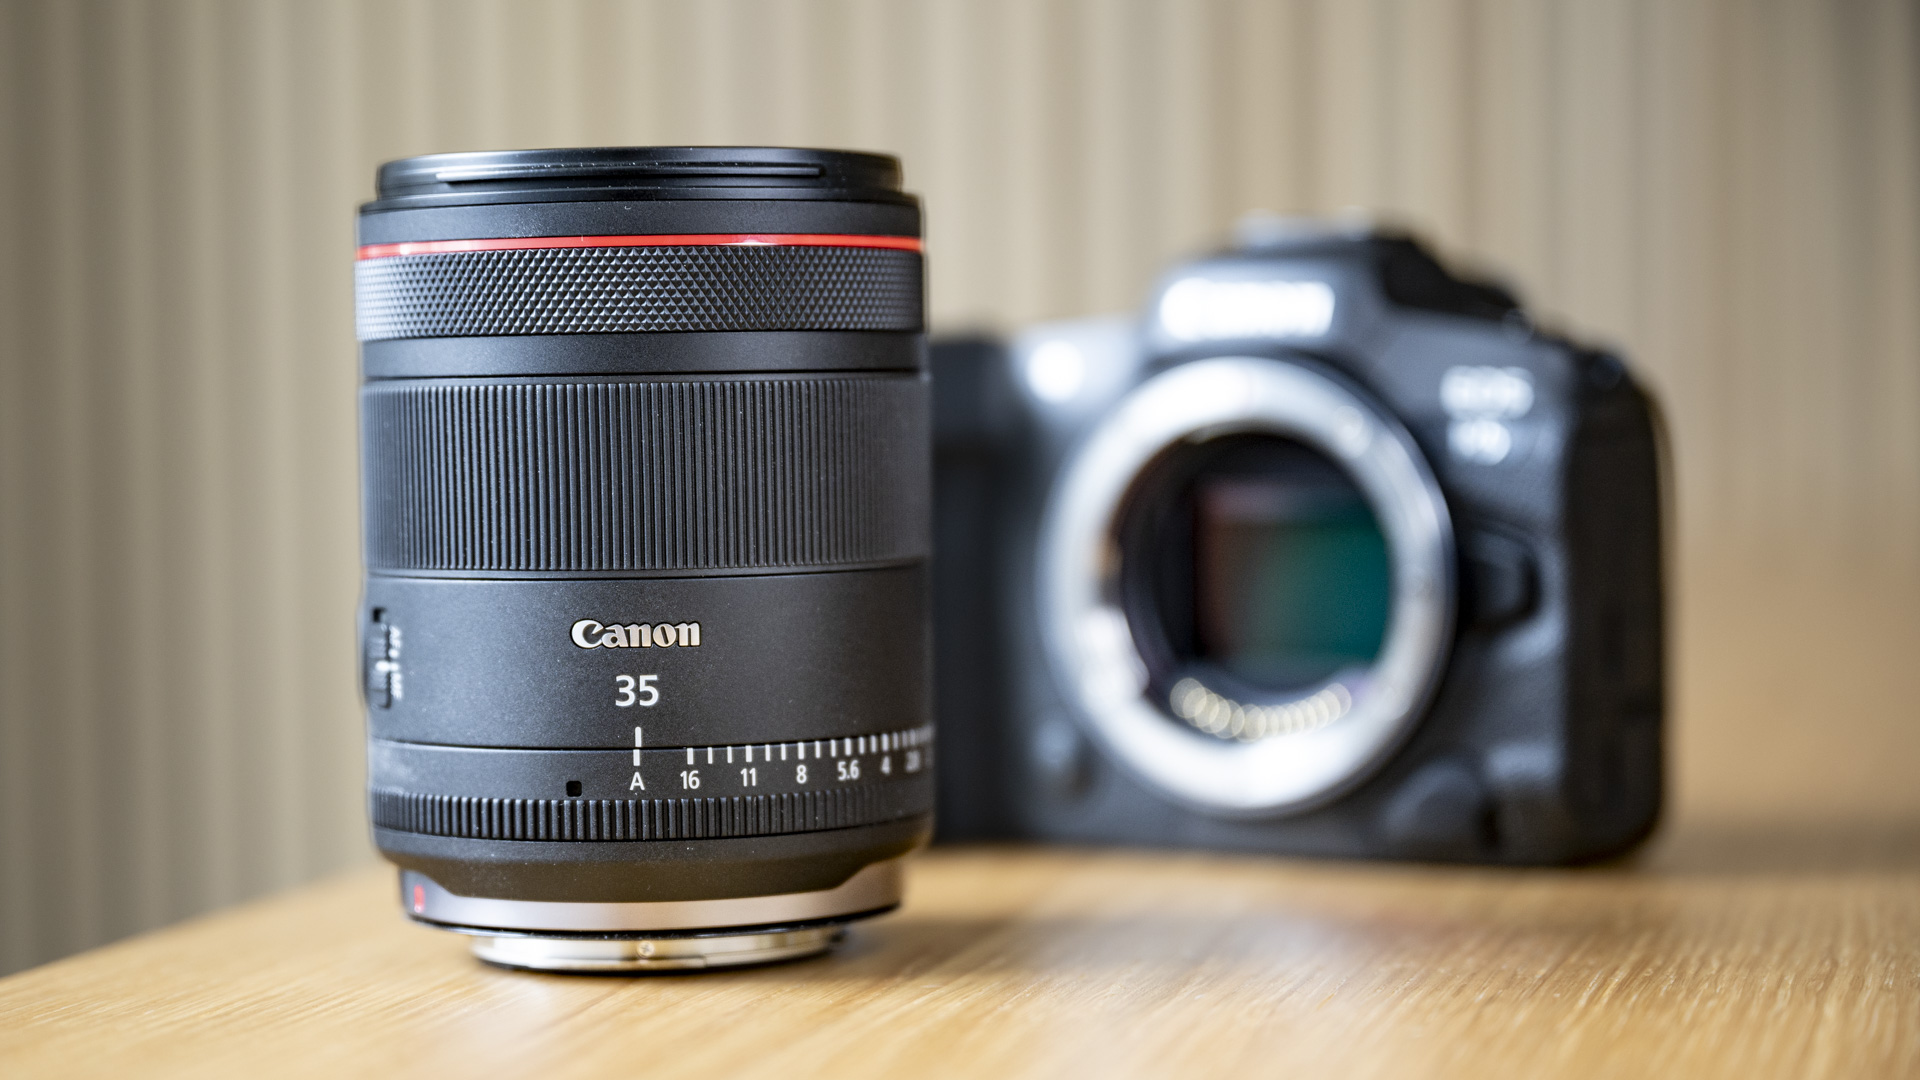 The Canon RF 35mm F1.4 lens on a wooden table in front a Canon EOS R5